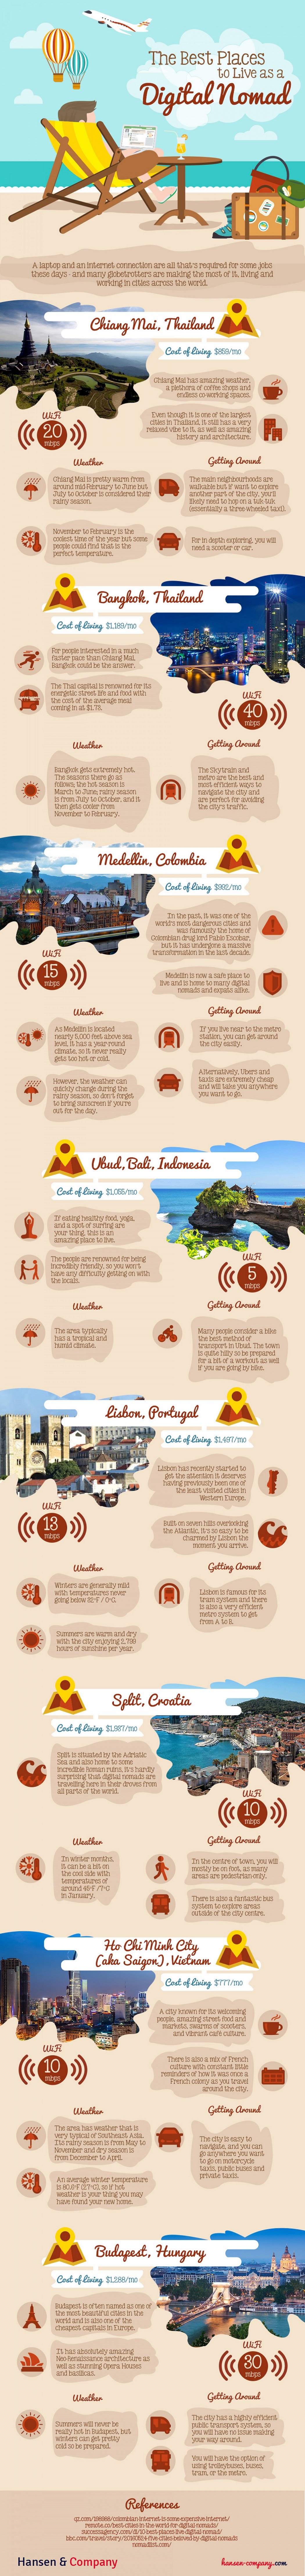 The Best Places to Live as a Digital Nomad (Infographic)